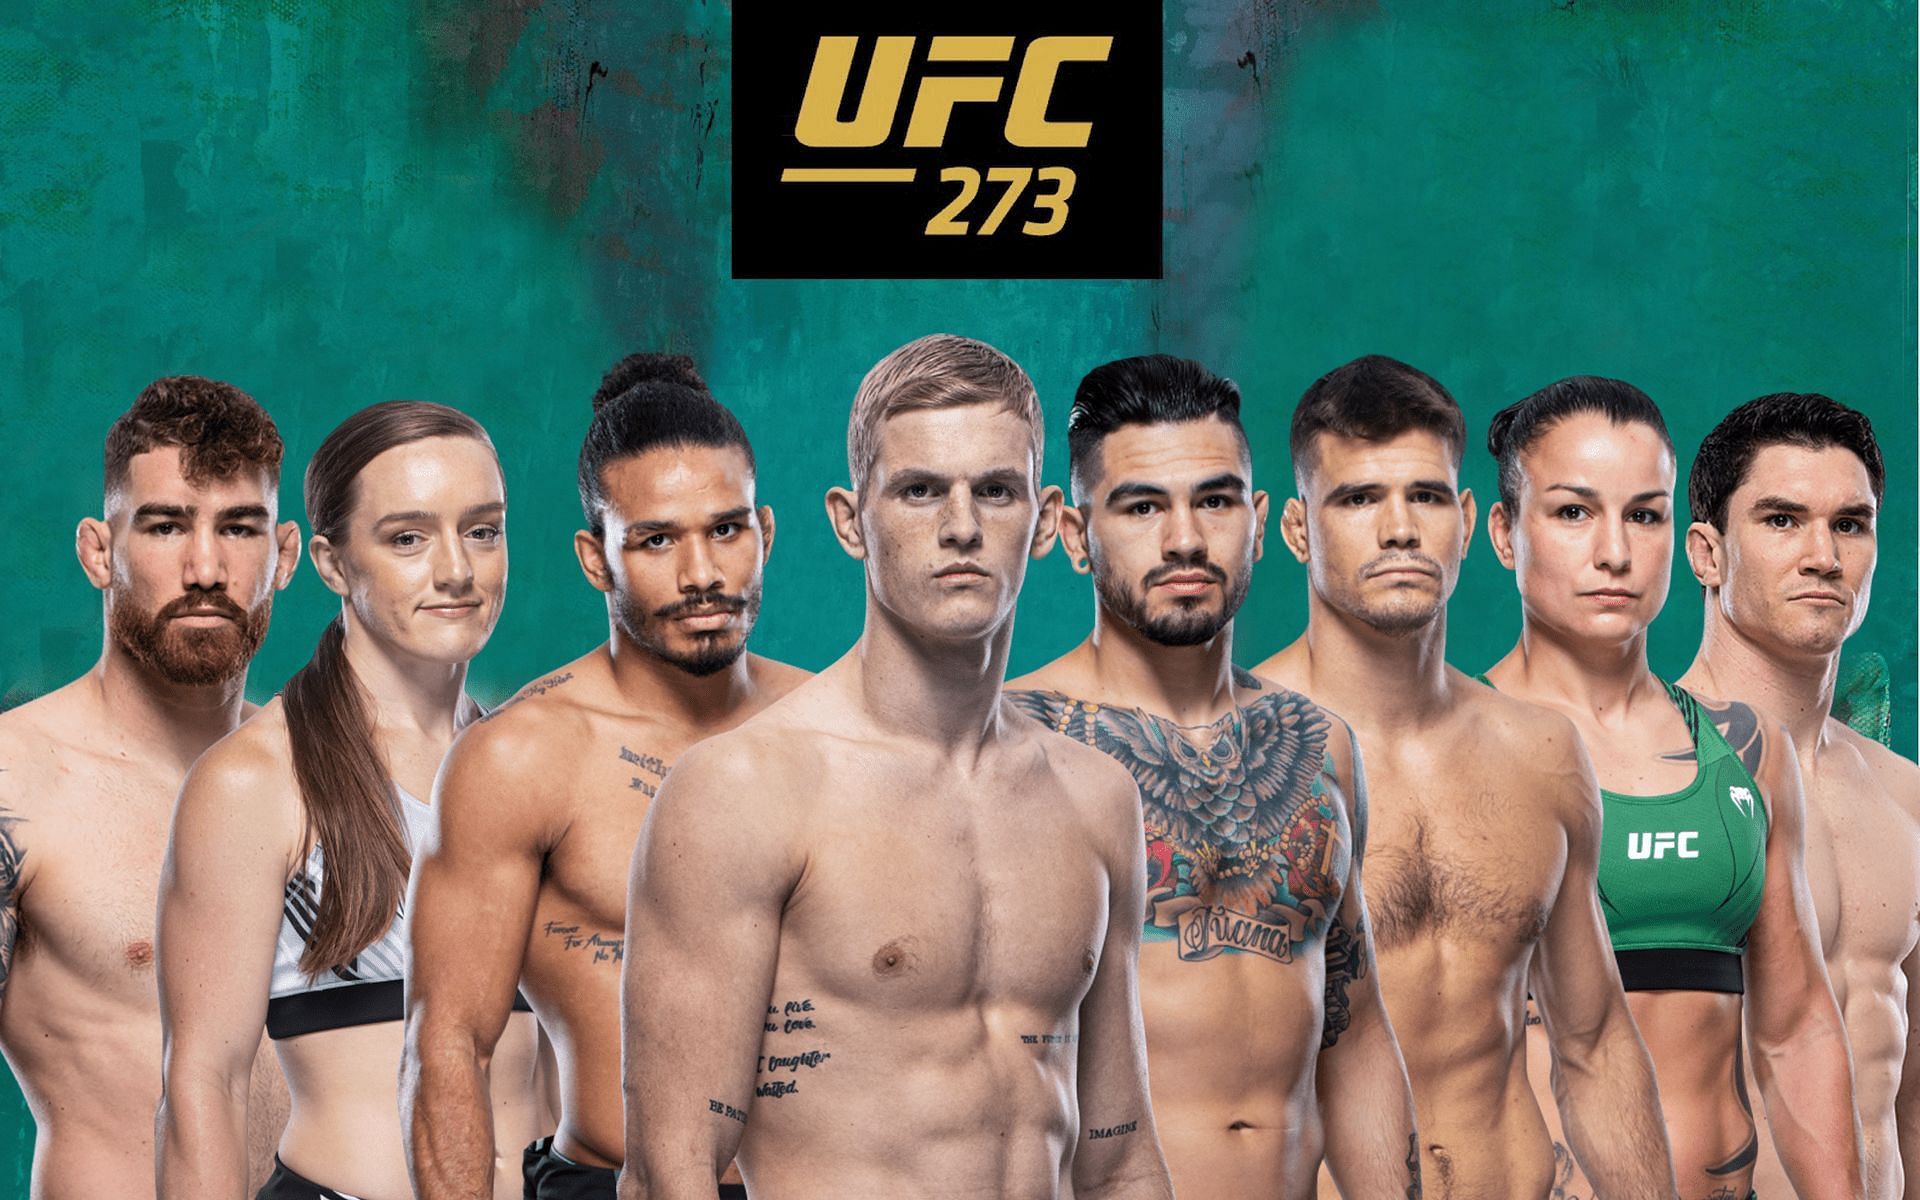 UFC 273 prelims and early prelims full results [Image credits: ufc.com]